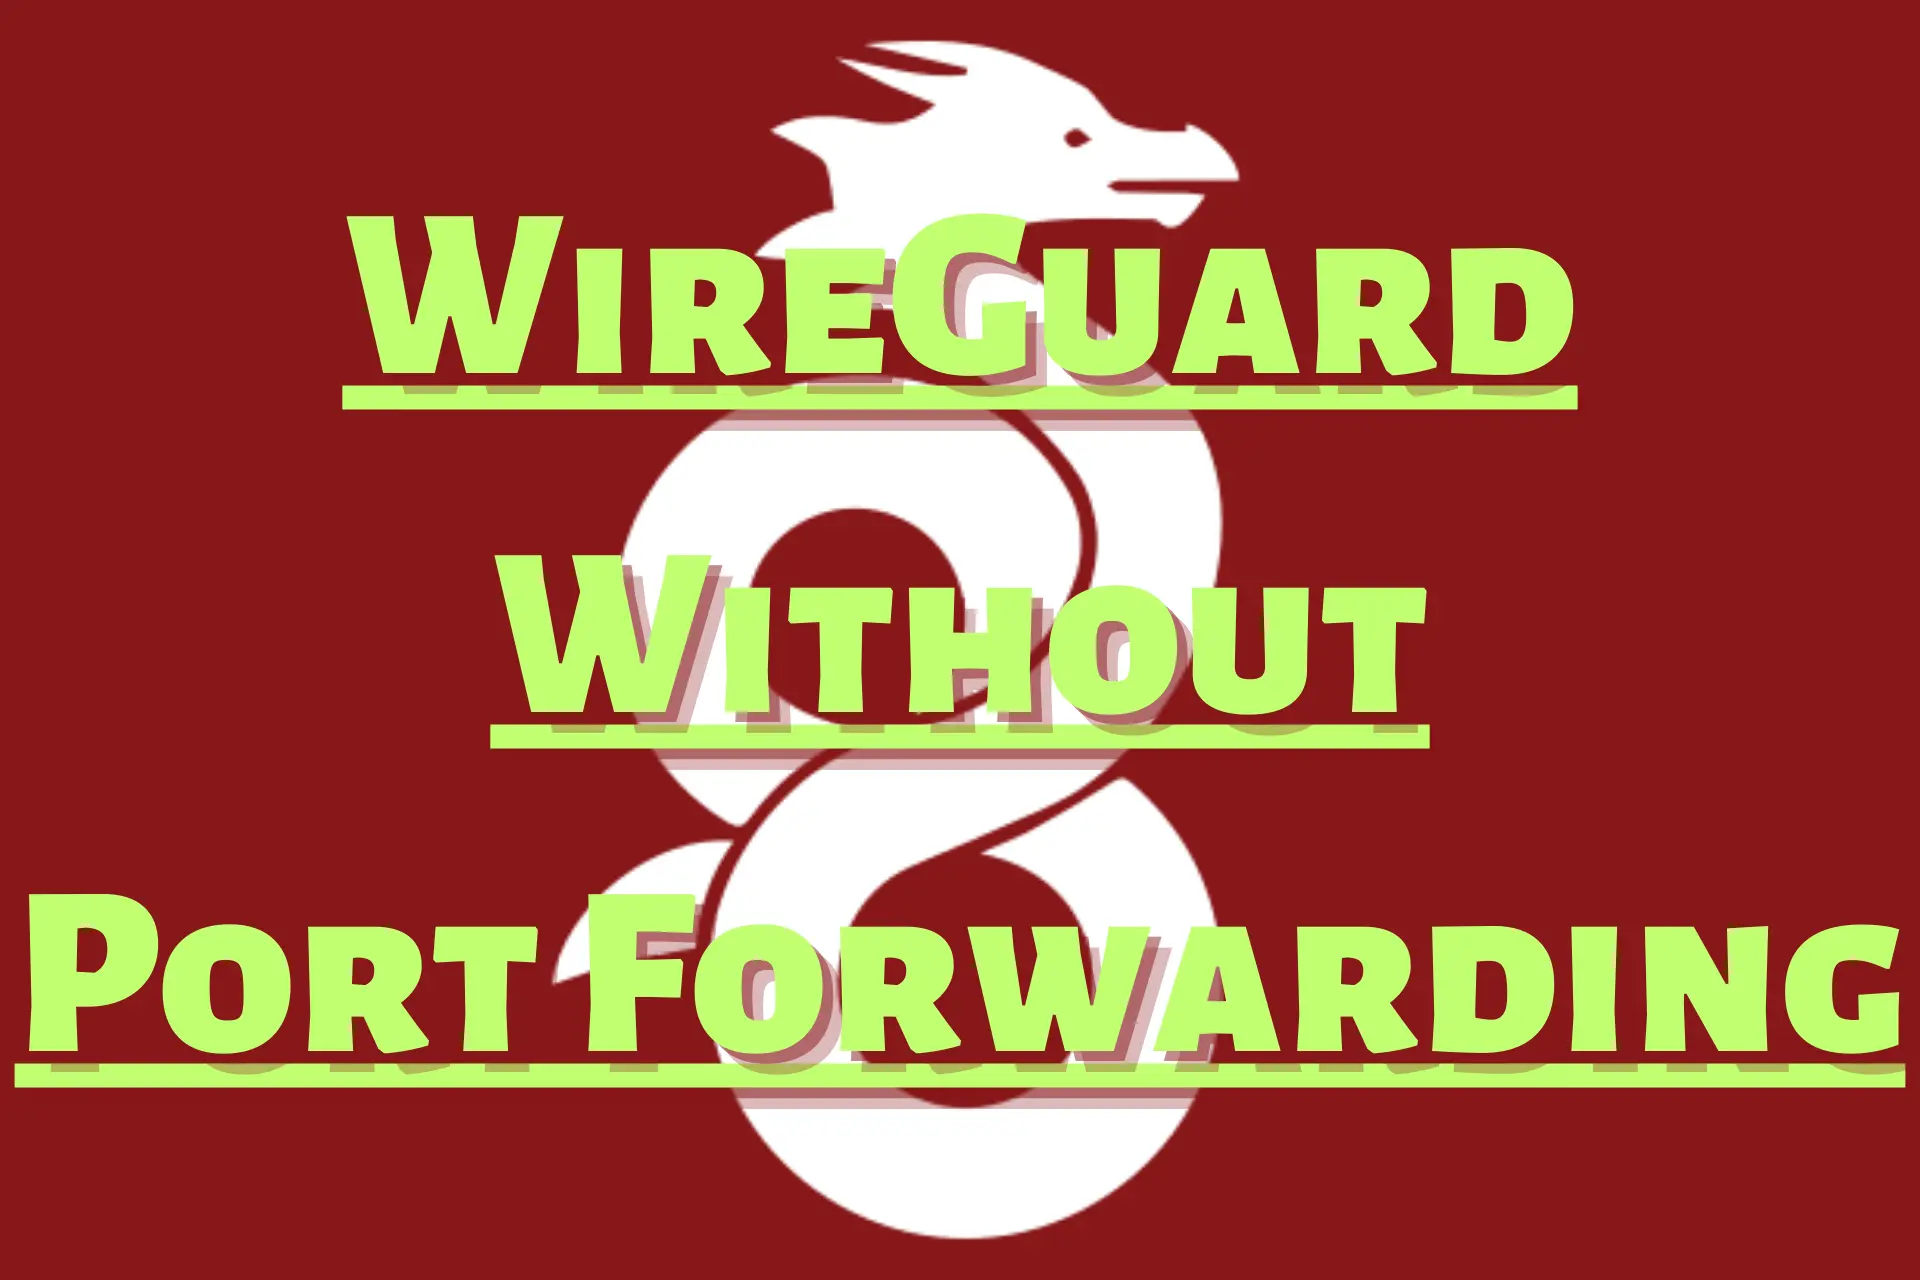 WireGuard without port forwarding